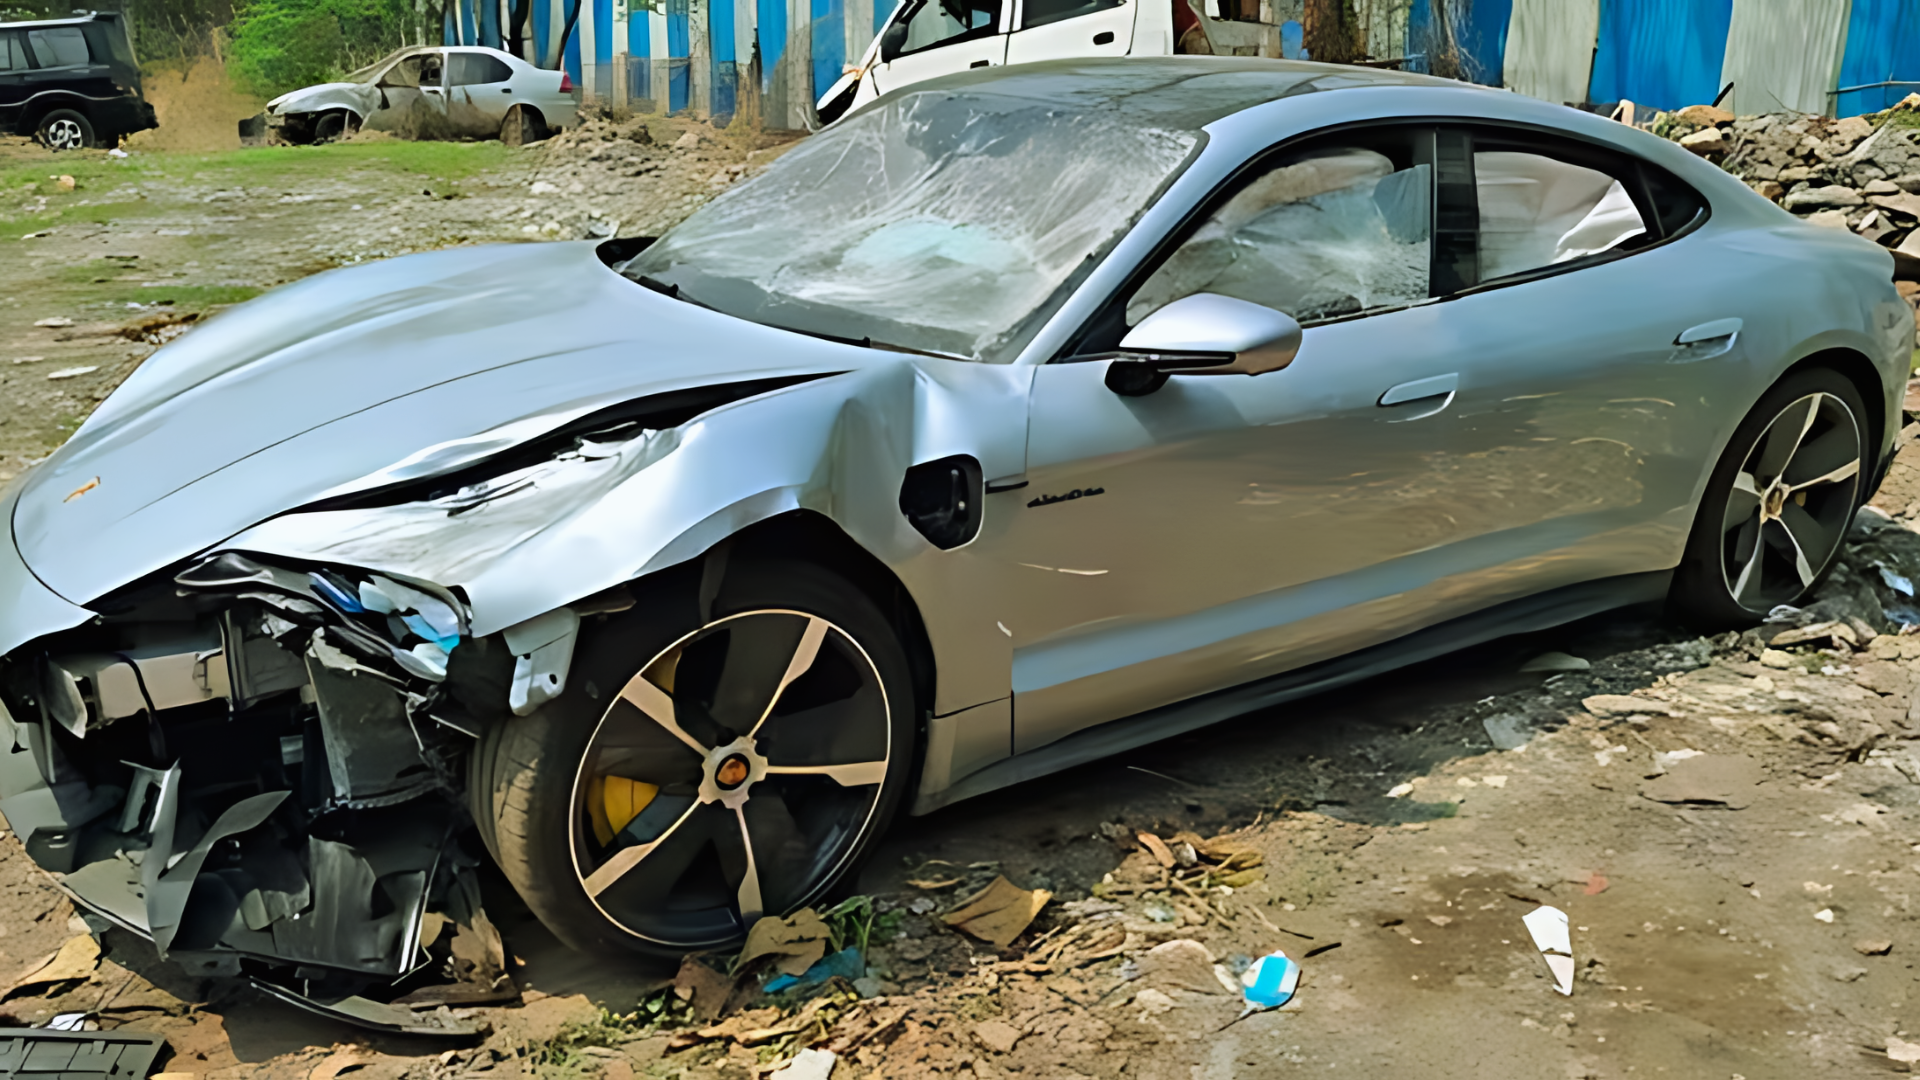 CCTV Shows Pune Teen Seen Drinking Before Fatal Porsche Accident; Police Seek Adult Trial